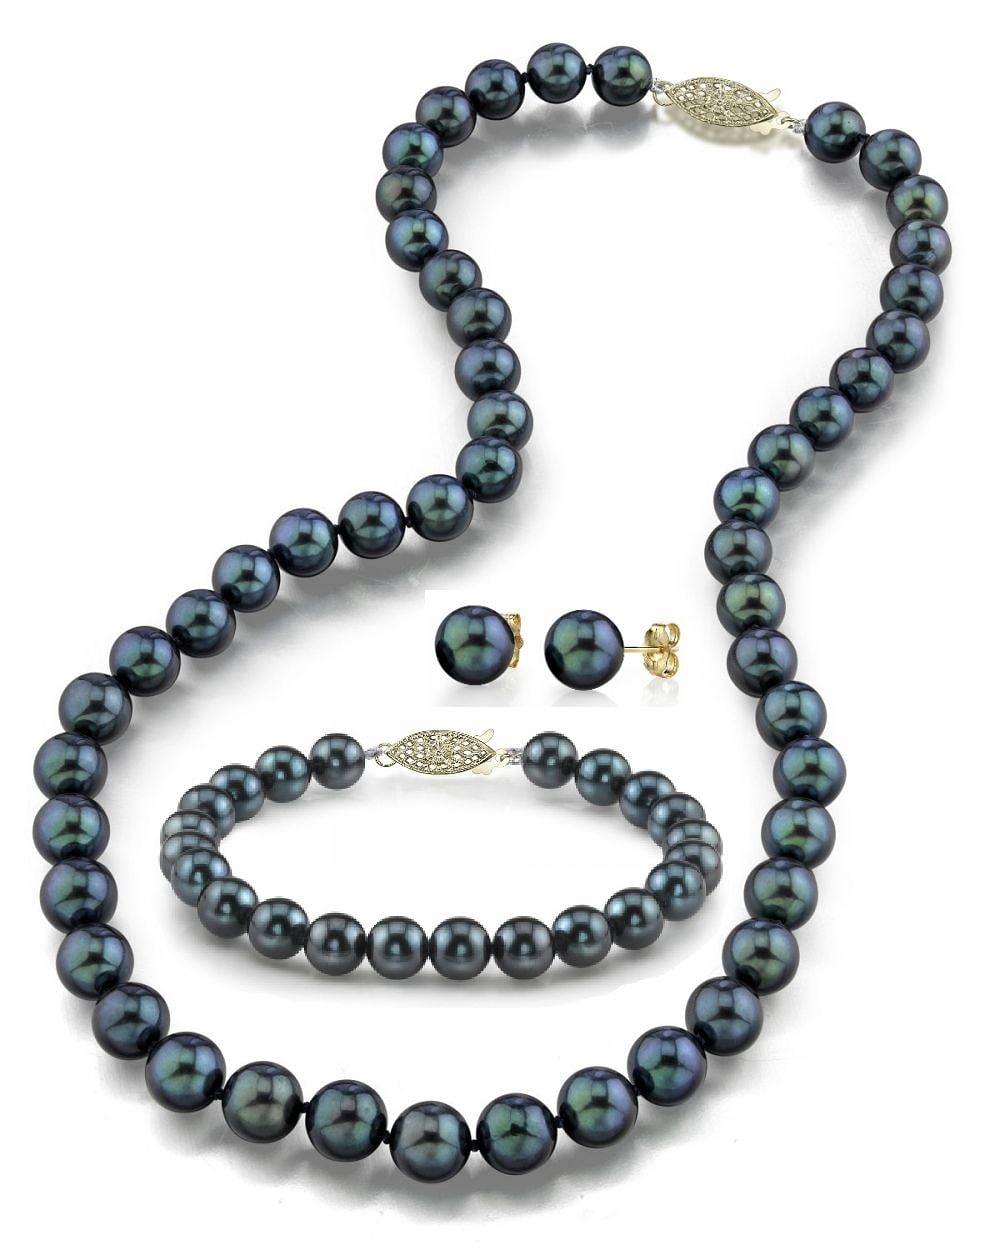 14k Gold Dyed-black Cultured Freshwater Pearl Jewelry Set 7-8 mm